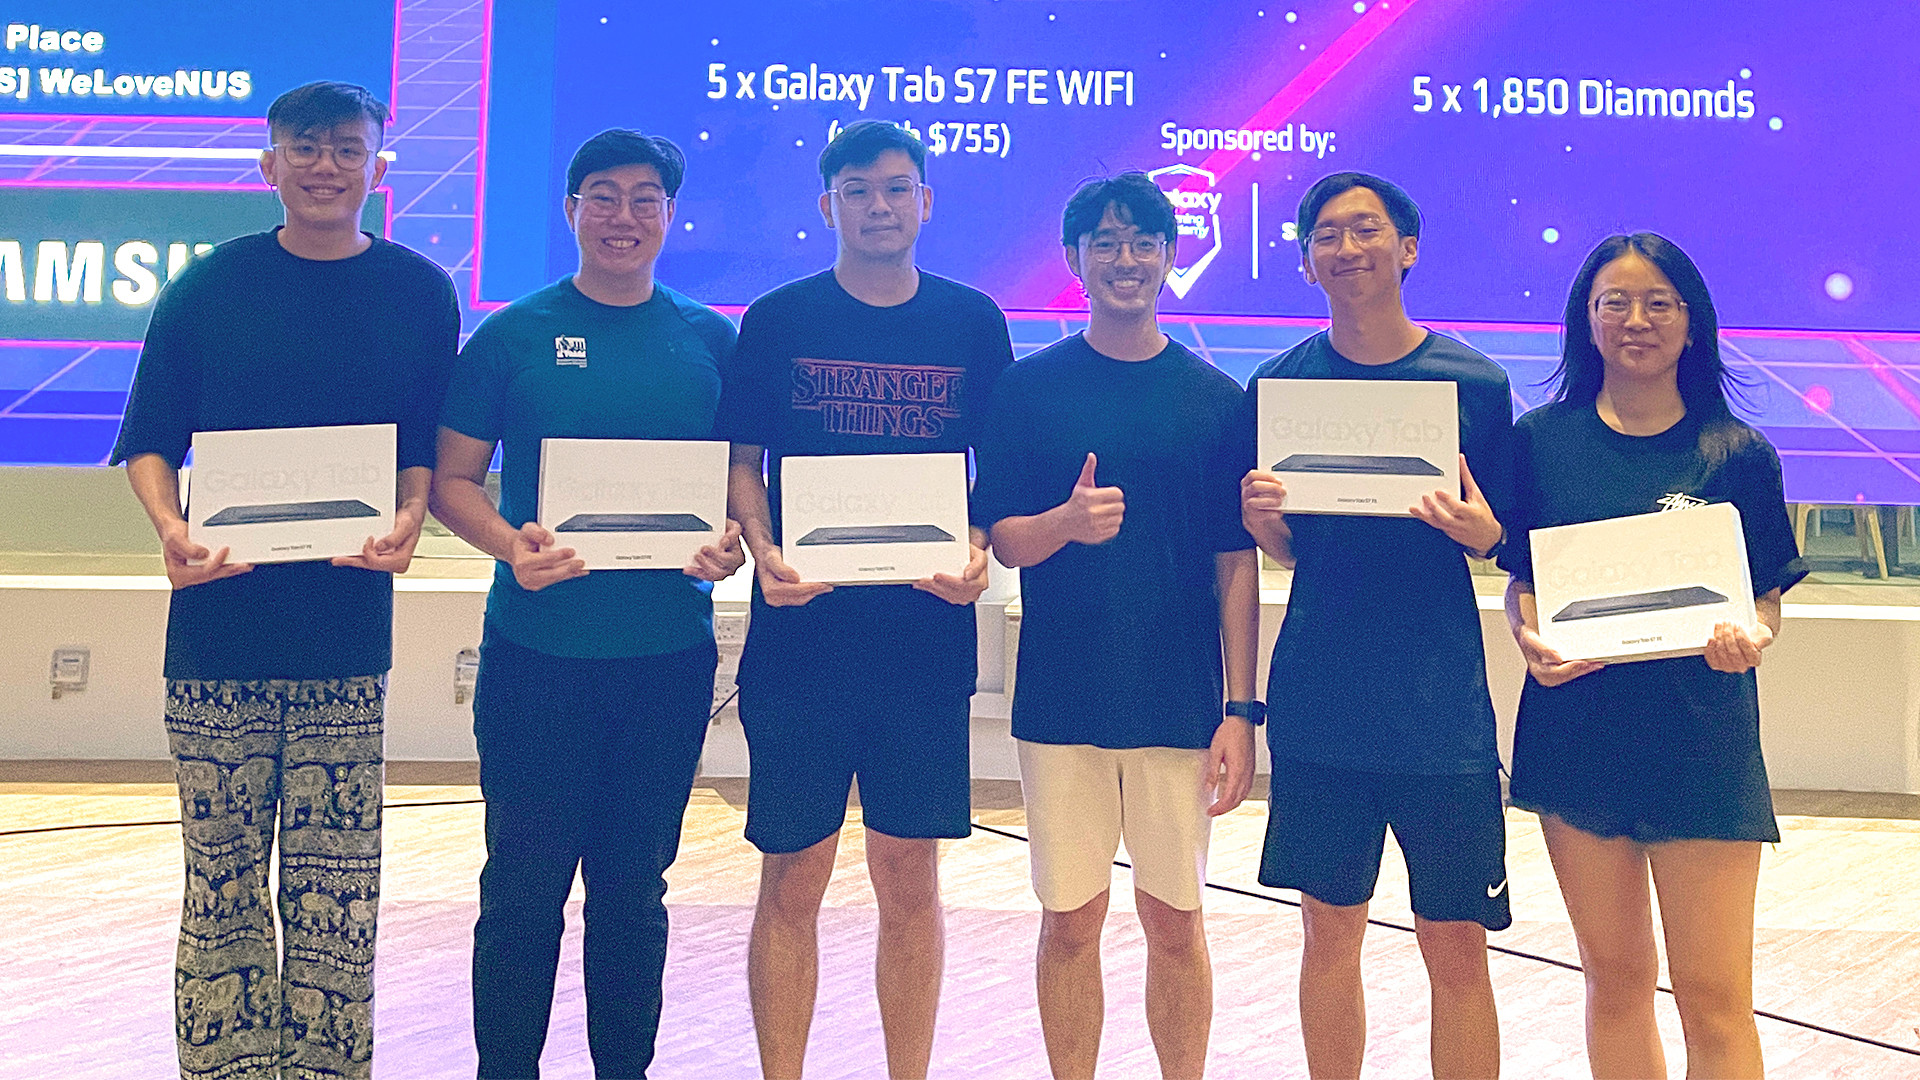 Year 4 Mechanical Engineering undergraduate Angel Clarita Juspi (extreme right) was part of the NUS team that won the Mobile Legends: Bang Bang tournament at IVGF 2023.